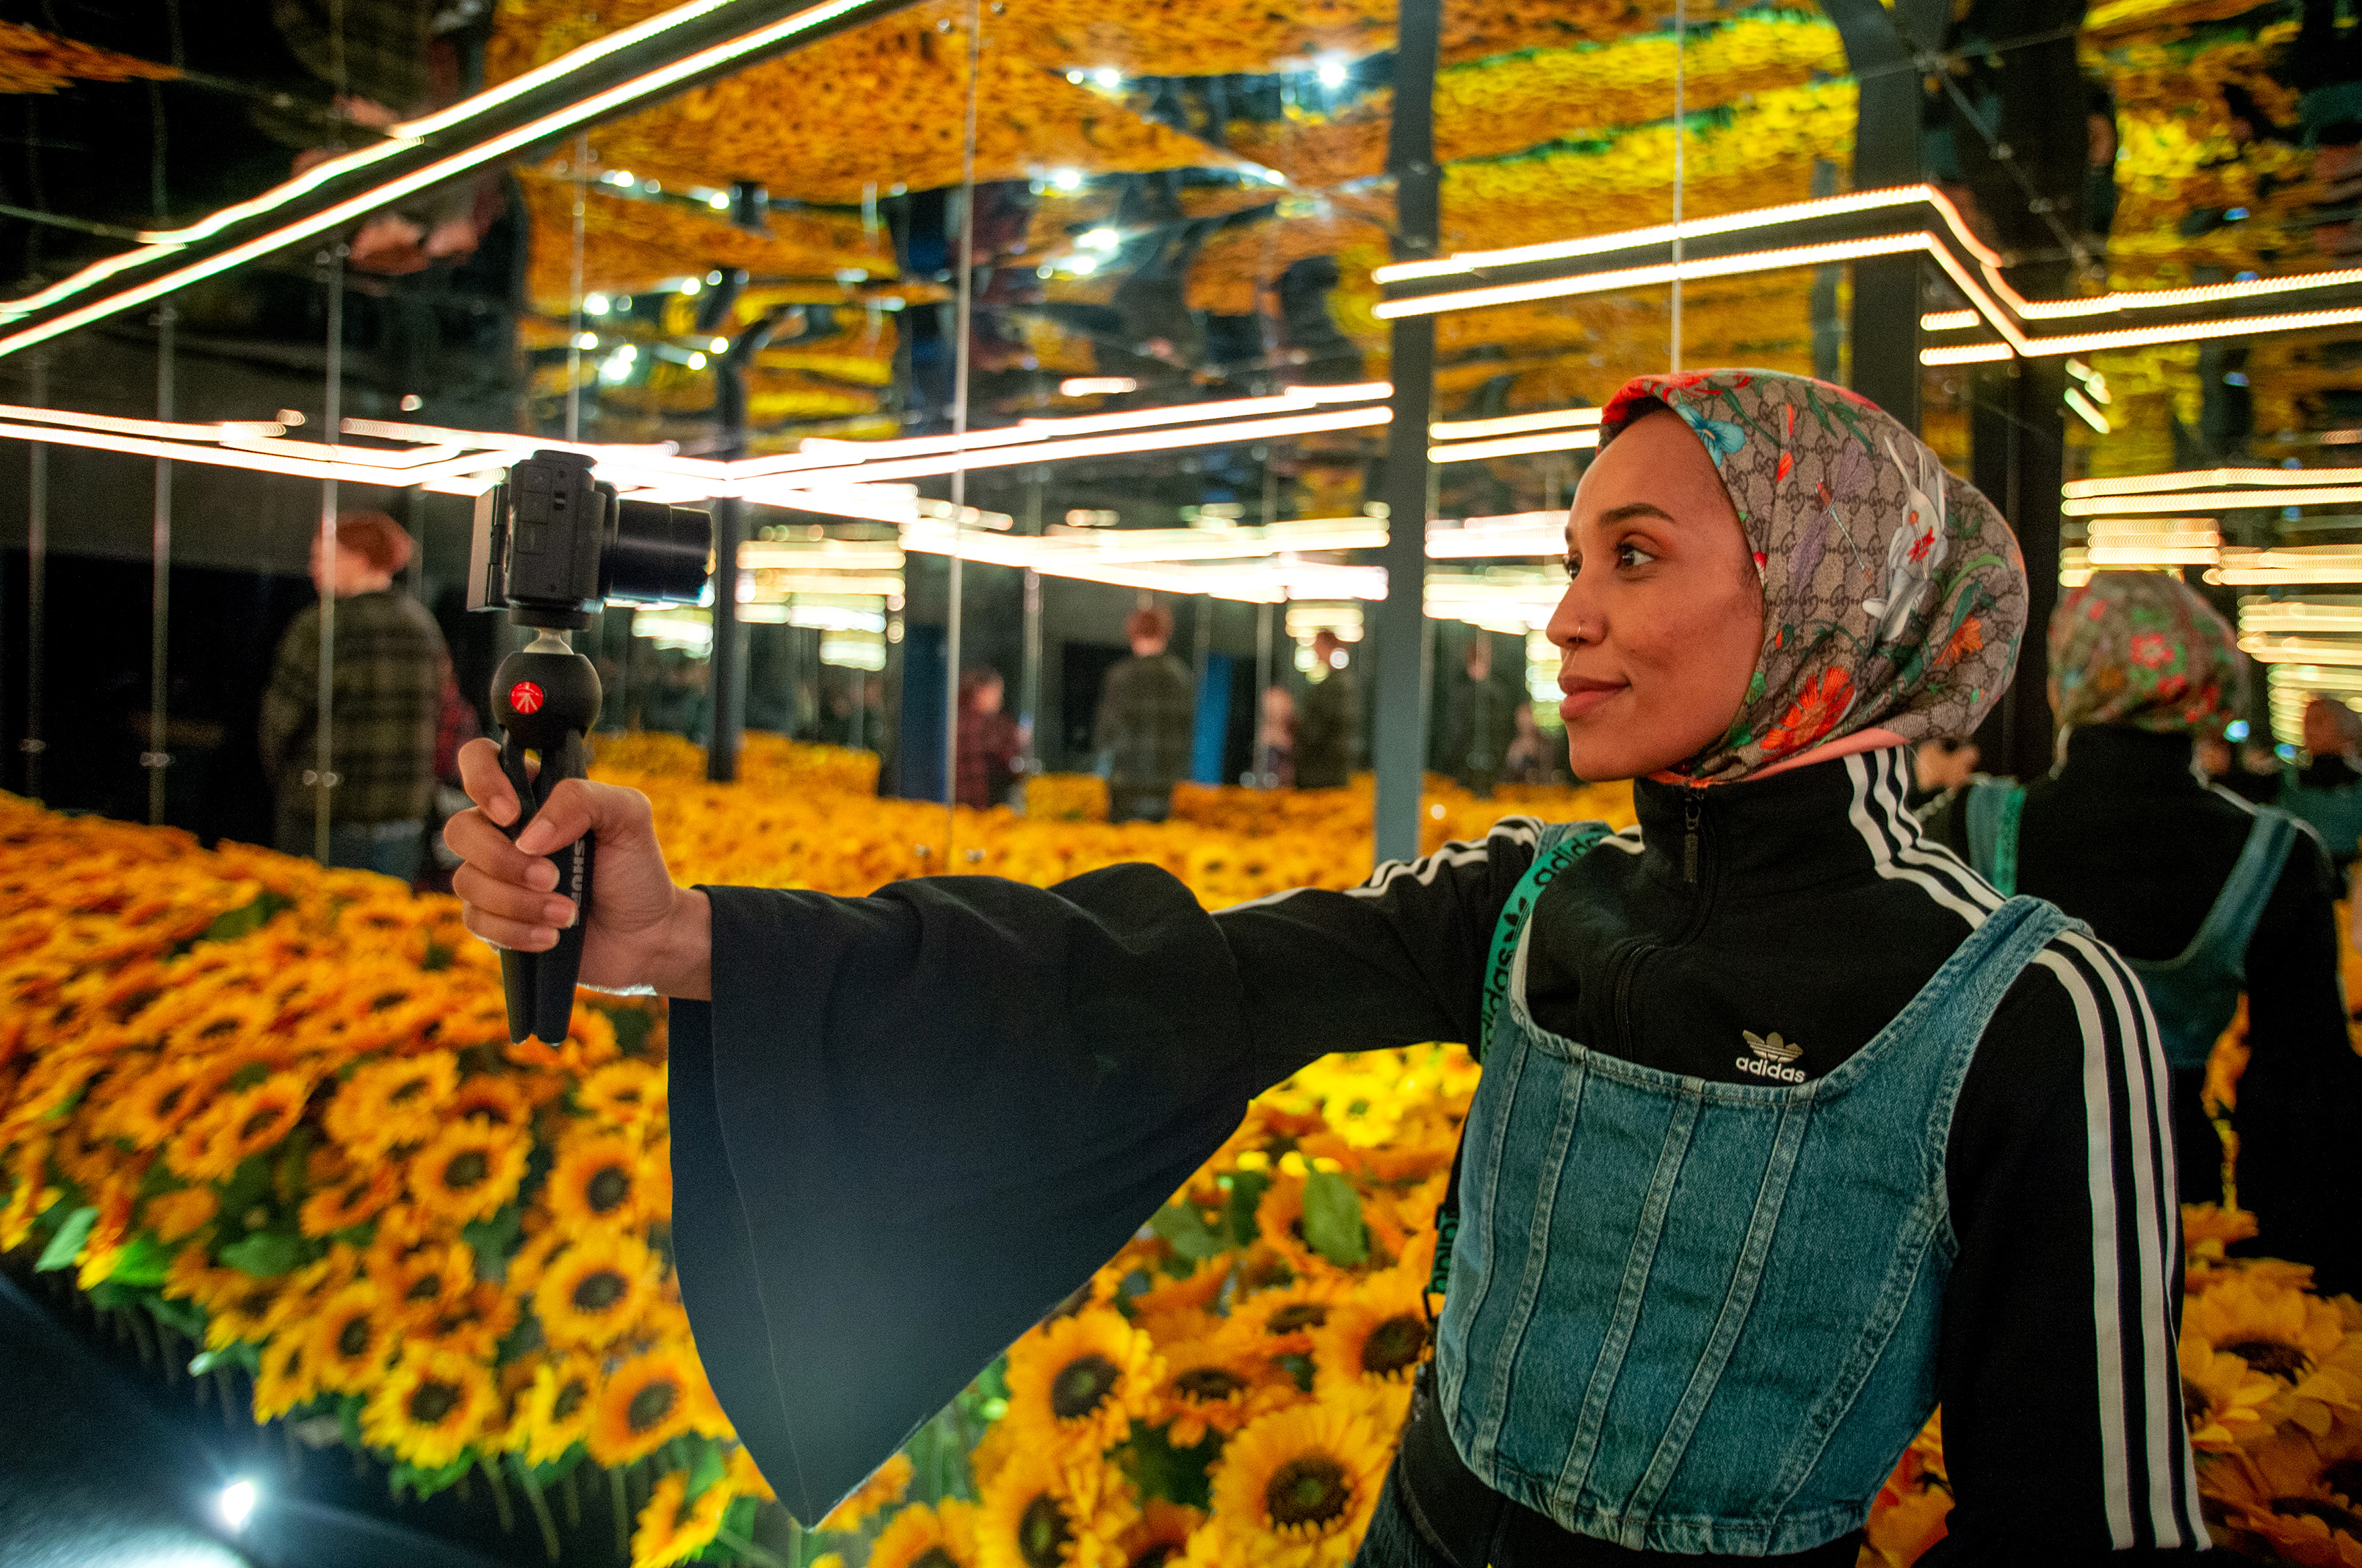 Sudanese-british poet and activist Asma Elbadawi takes a selfie with the sunflowers exhibit